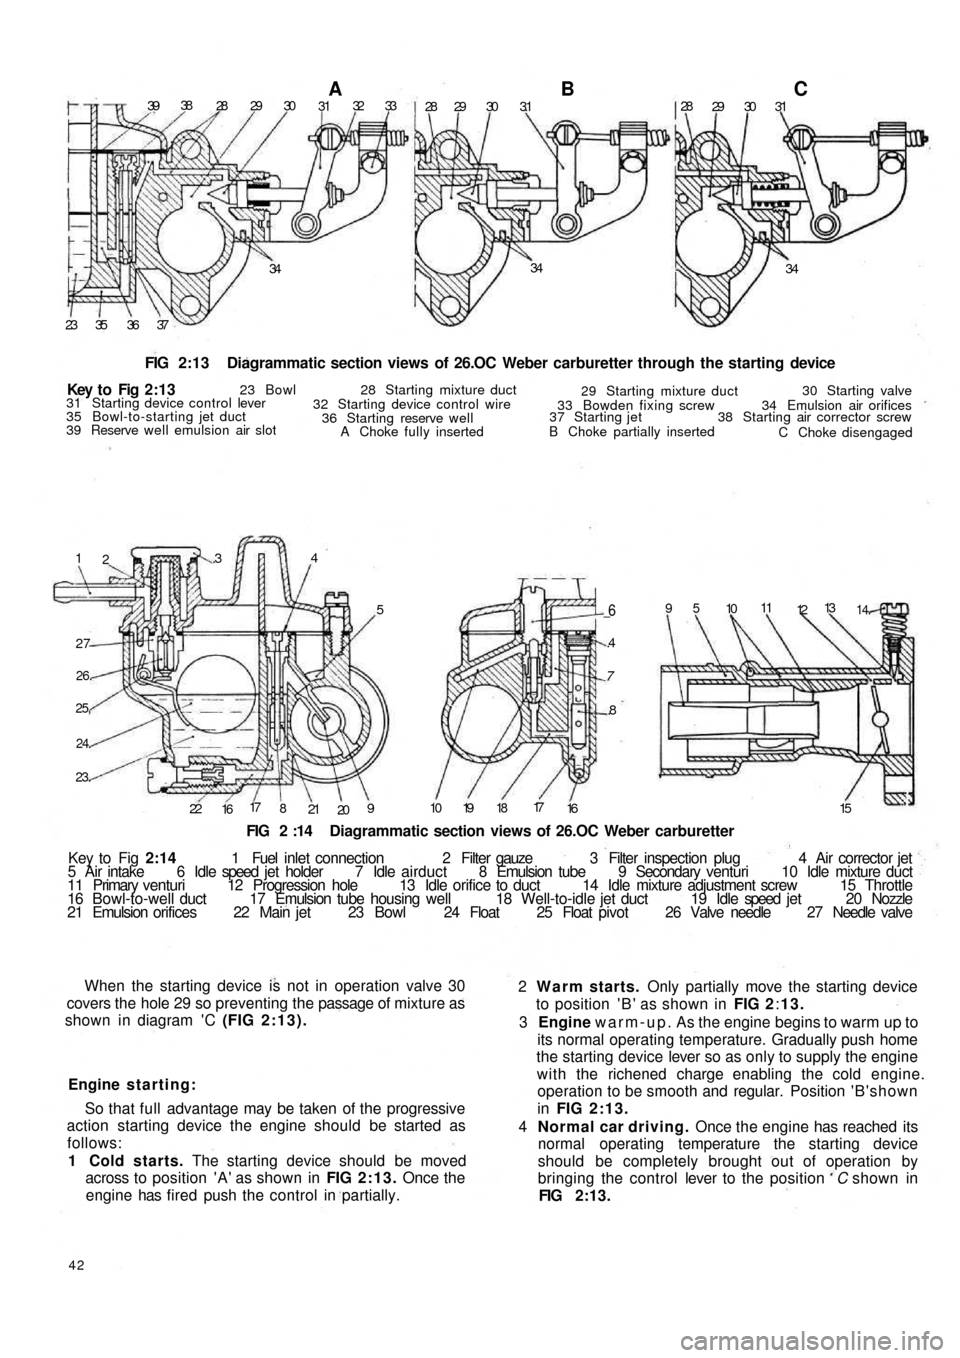 FIAT 500 1957 1.G Owners Guide 3938
28 29 30A3132 33
28 29 30 3.1B28
29 30 31C
34 34
34
37 36 35 23
FIG 2:13  Diagrammatic section views of 26.OC Weber carburetter through the starting device
1
2.34
5
27
26.
25,
24.
23.
22
1617
8
2